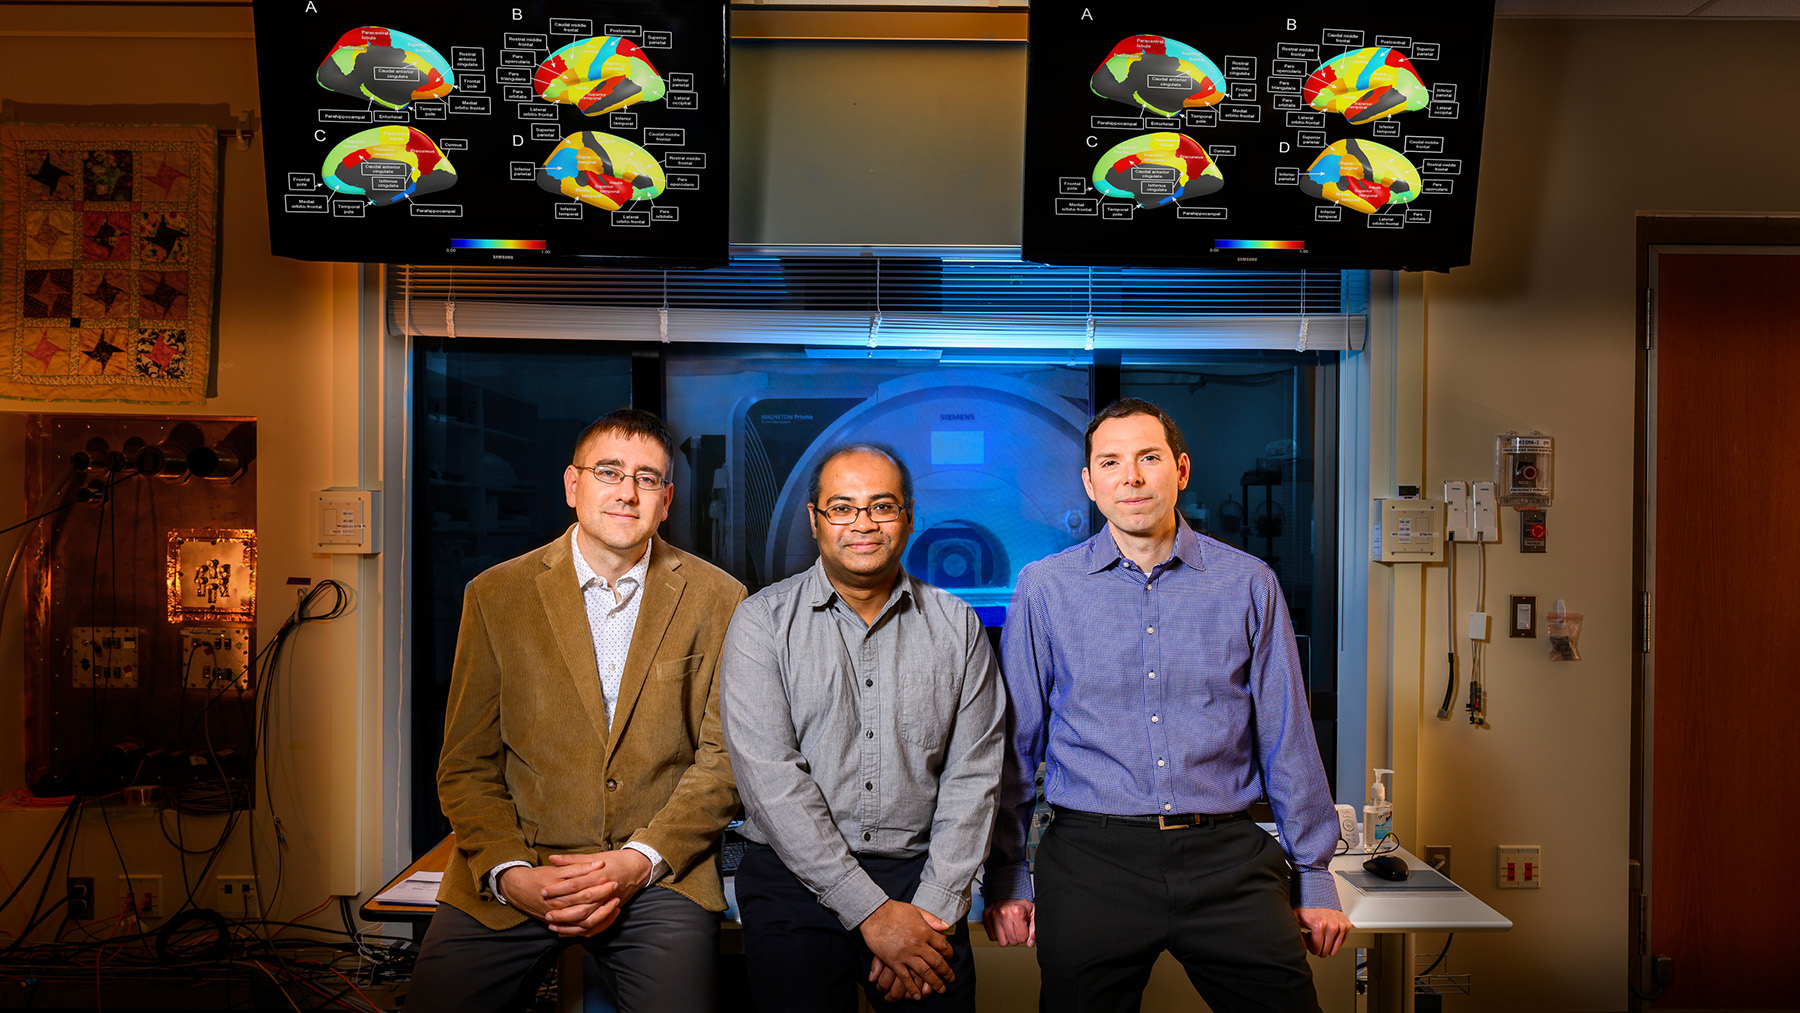 researchers Christopher Zwilling, Tanveer Talukdar and Aron Barbey. Photo by Fred Zwicky